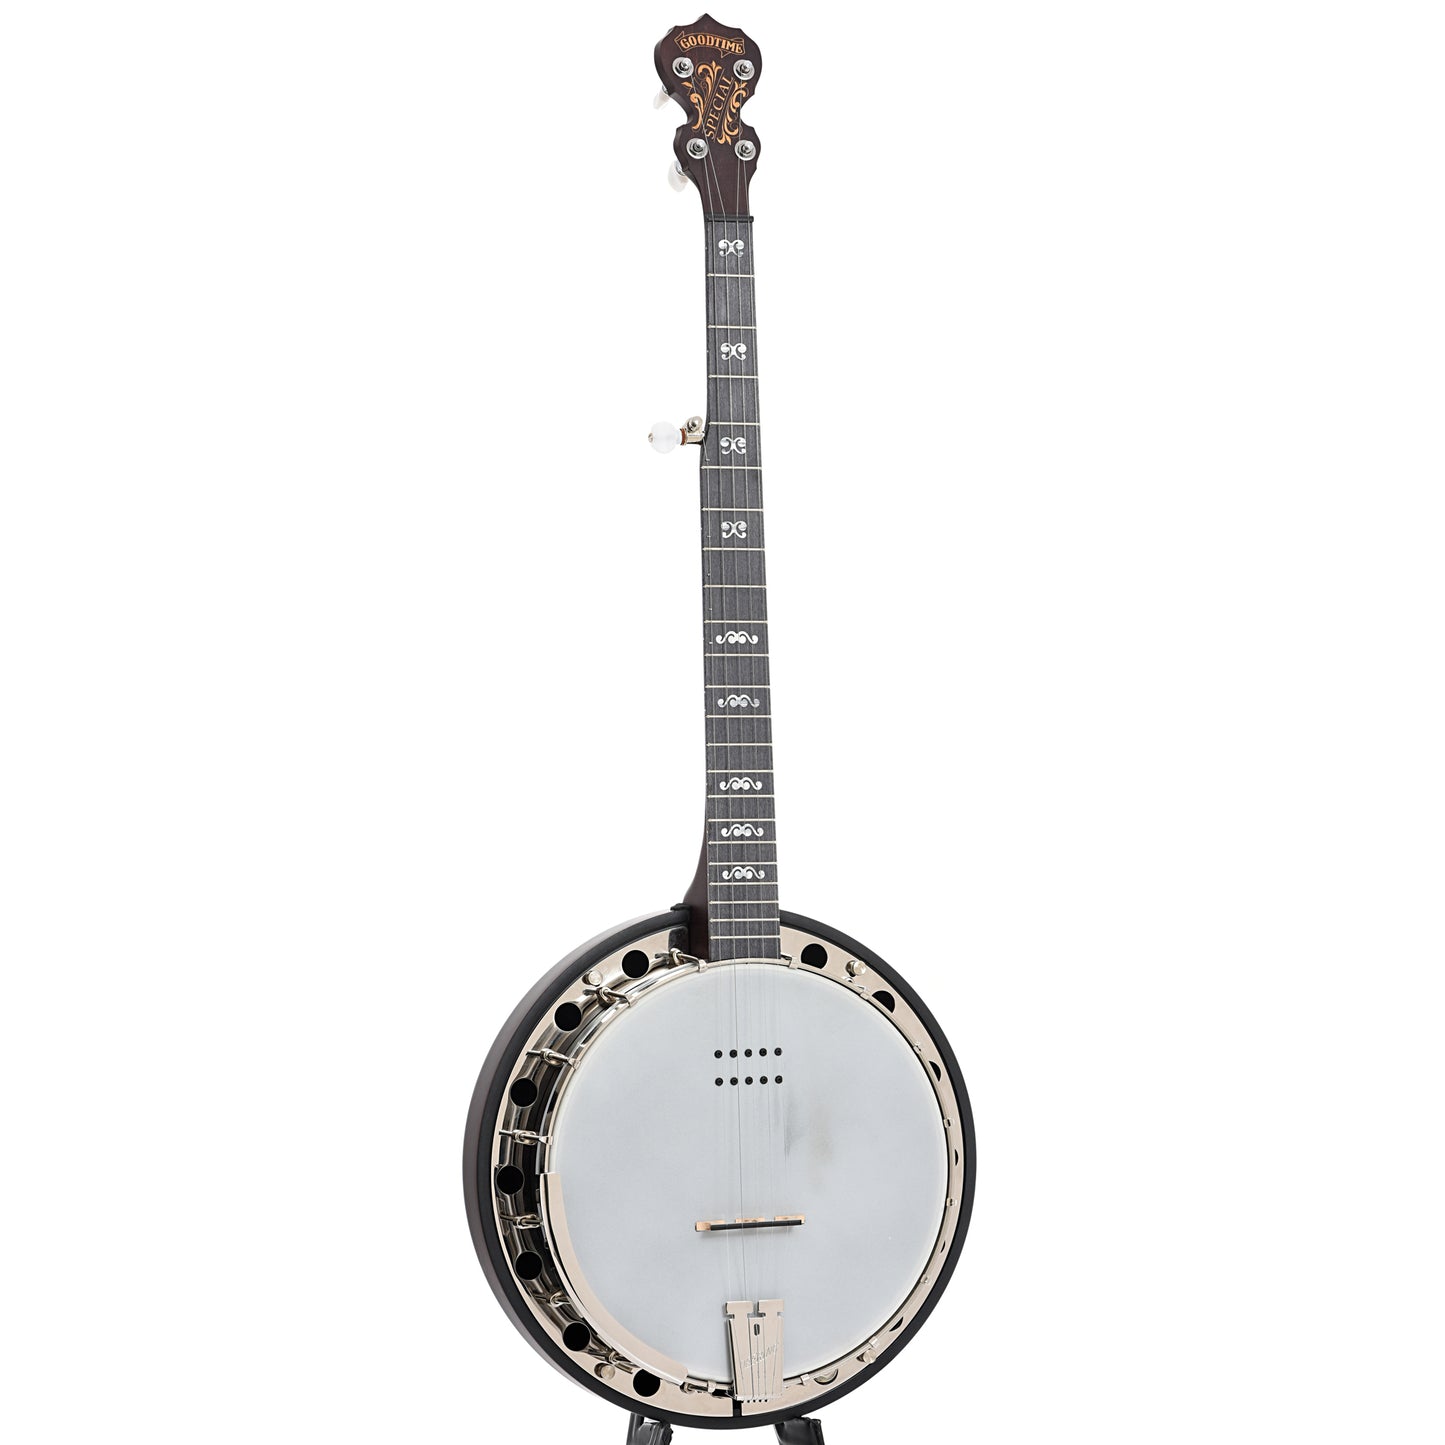 Full front and side of Deering Artisan Goodtime Special Resonator Banjo